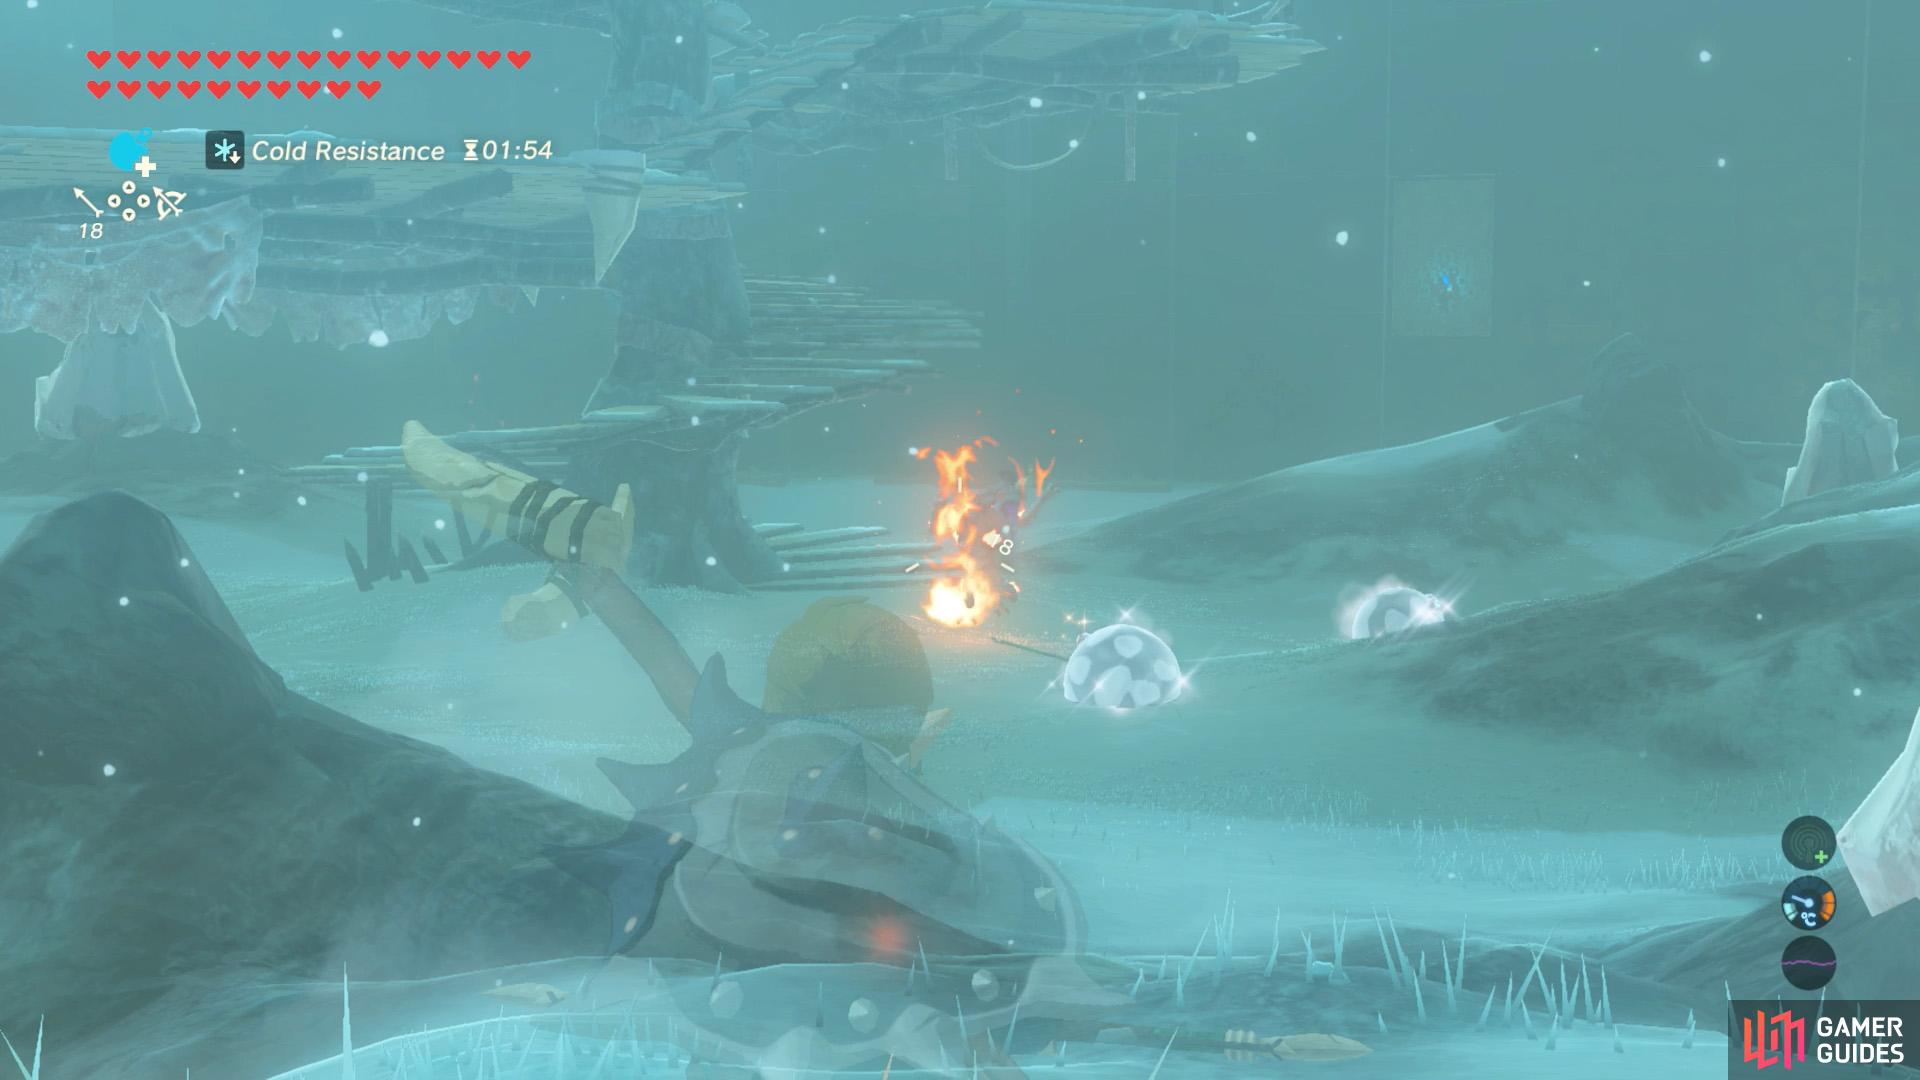 First, shoot the Lizalfos guard with a Fire Arrow.